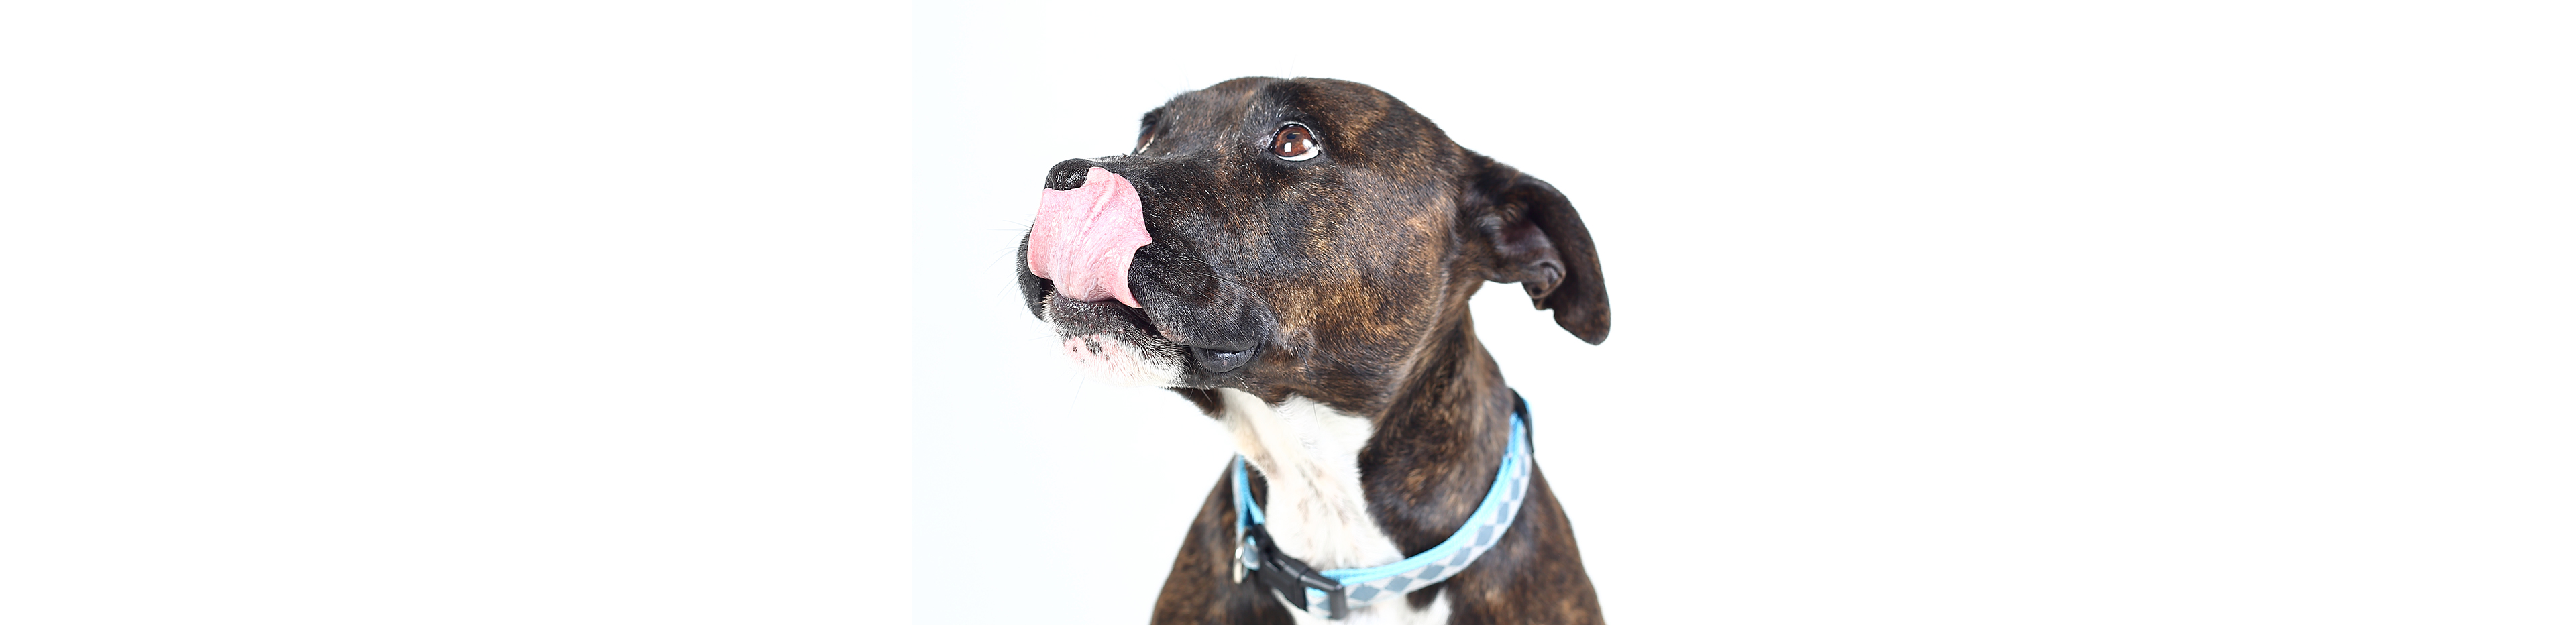 Dog licking lips promoting the healthy pet treat recipe for Christmas blog